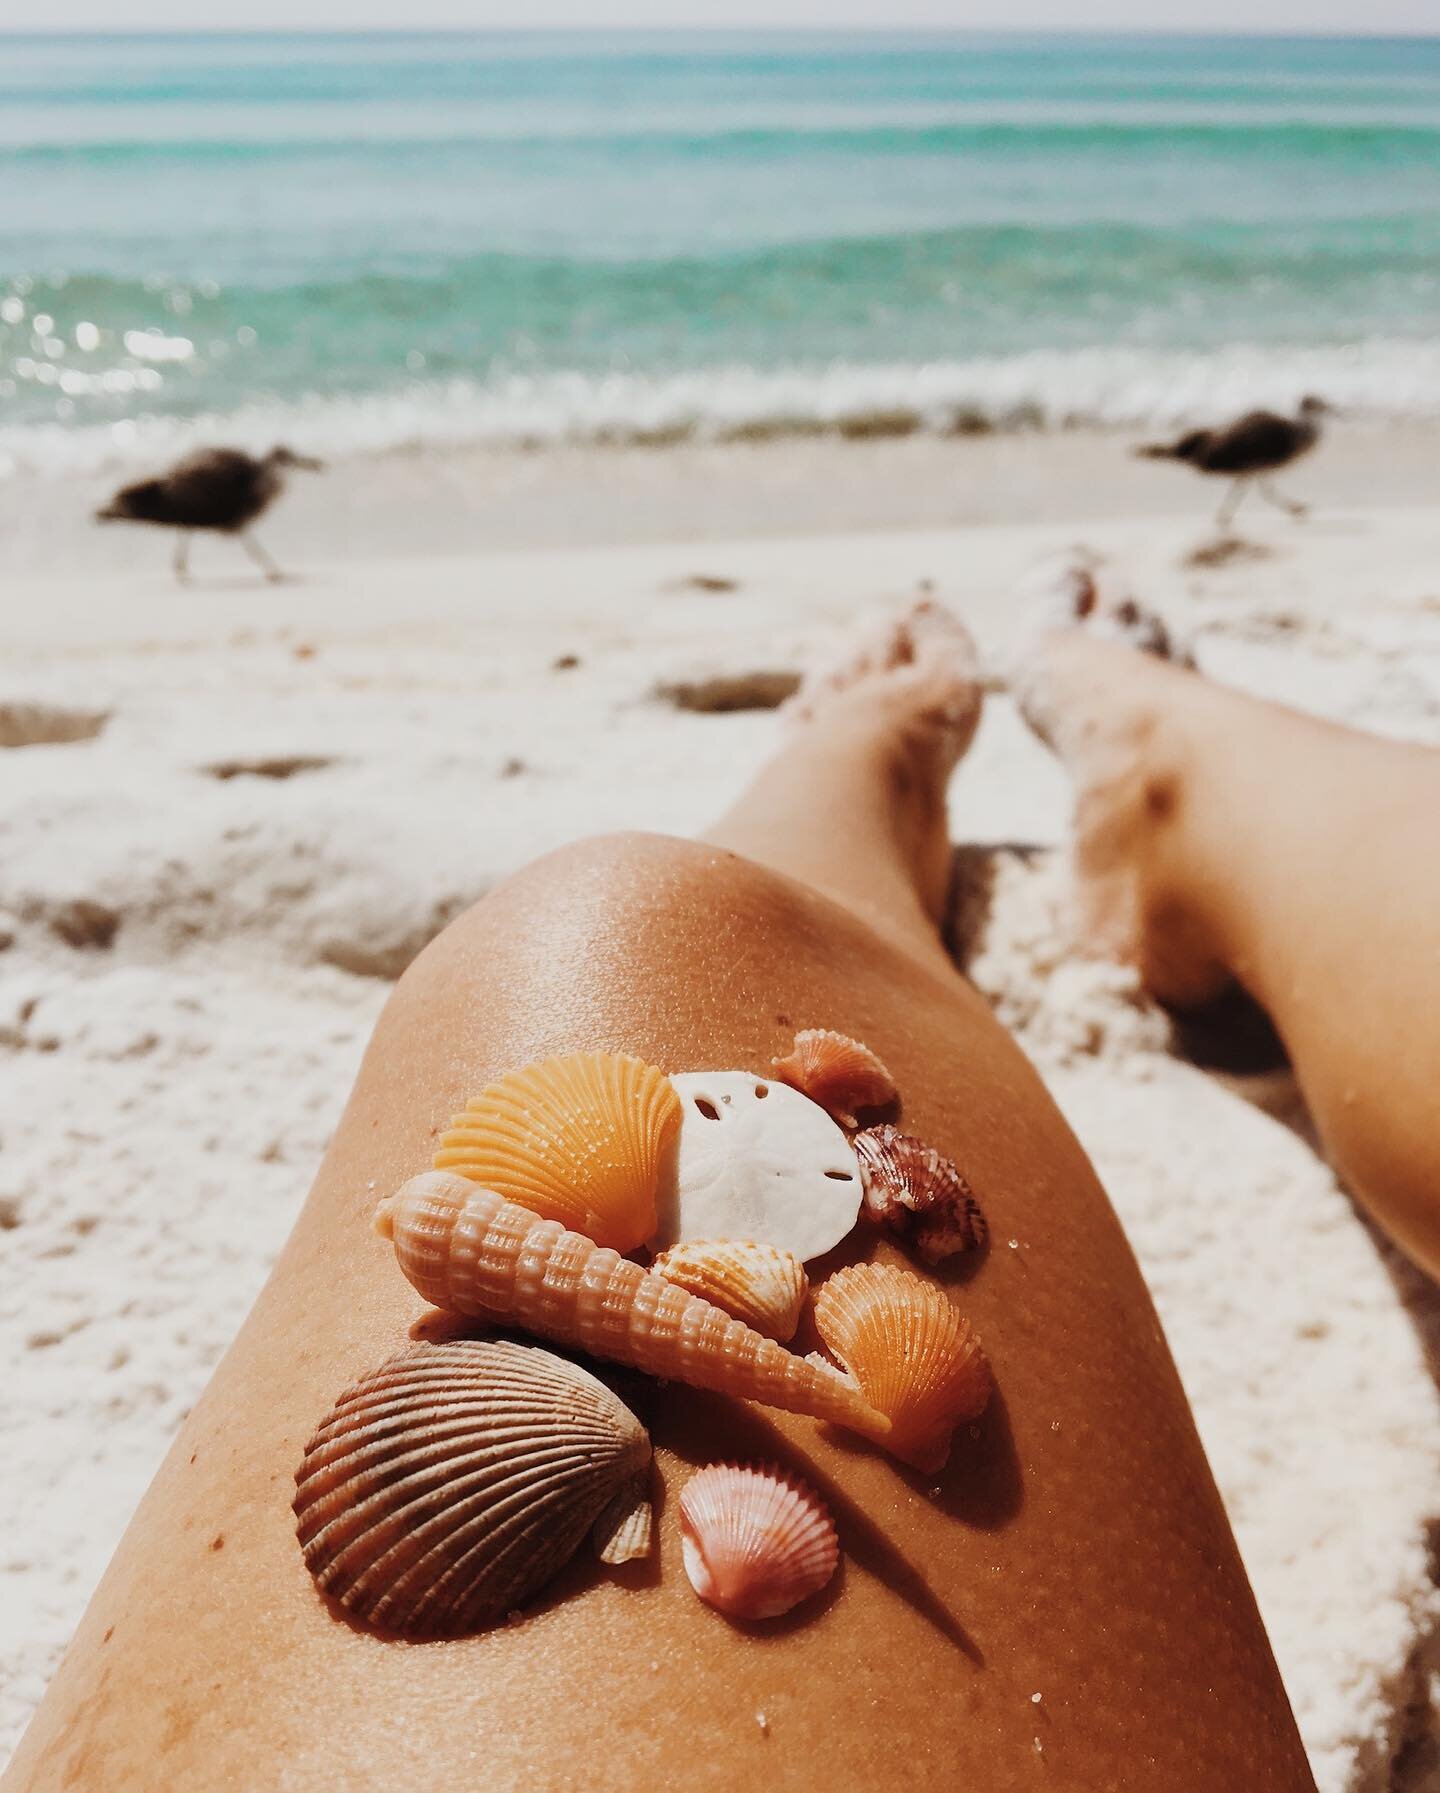 Destin gems 🐚✨ Treasure looks different for everyone &mdash; for us, it&rsquo;s the freedom to live, work and play from anywhere, and the gems we find along the way 🌊 #grateful